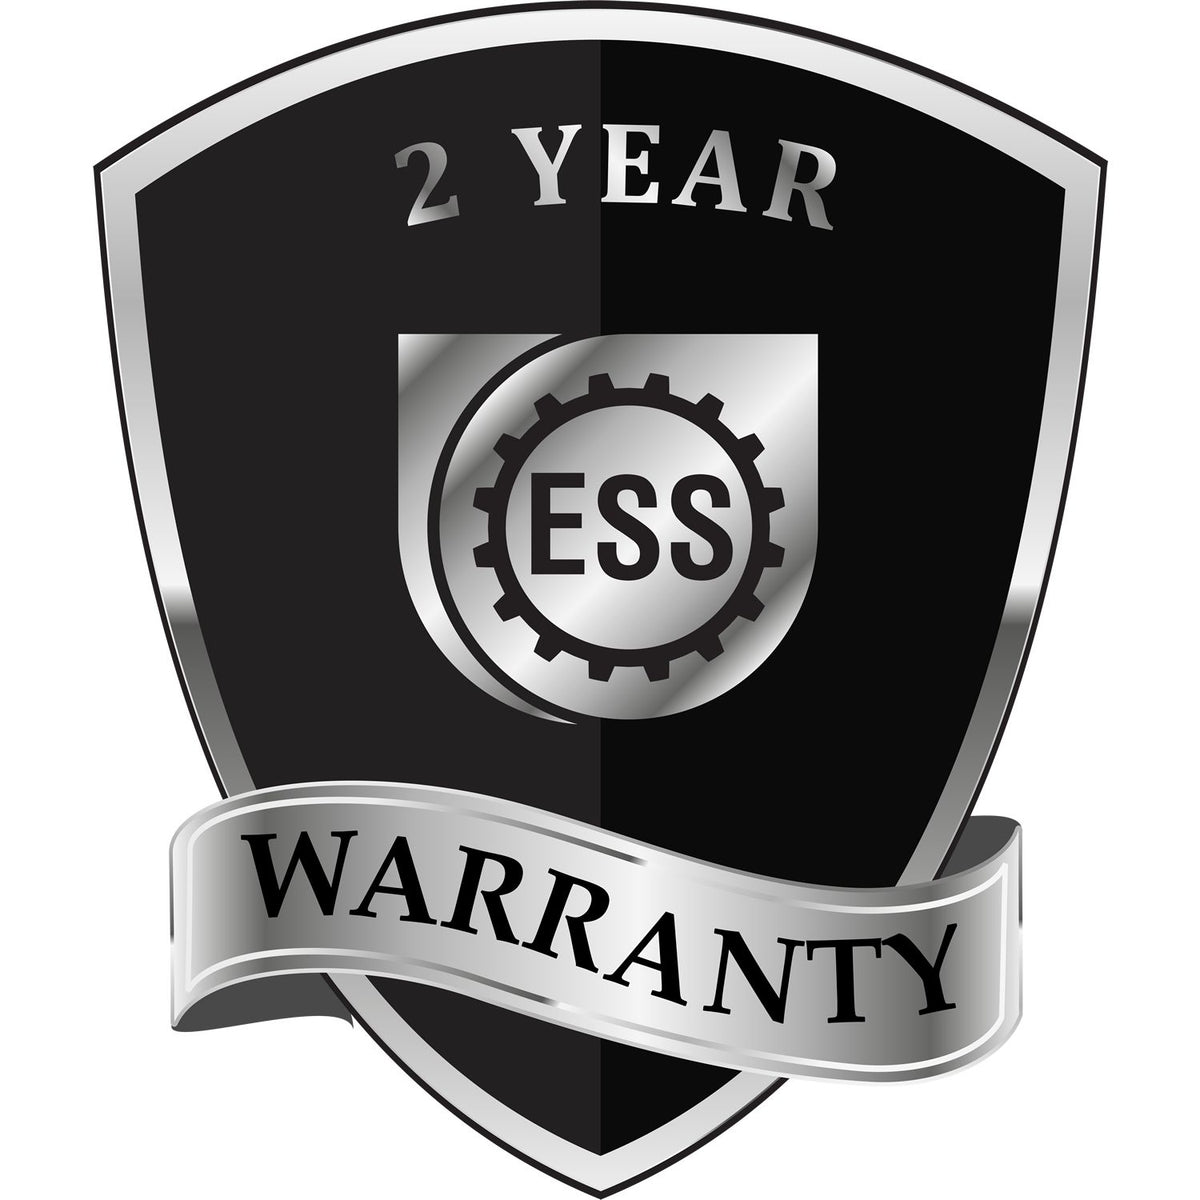 A badge or emblem showing a warranty icon for the Heavy Duty Cast Iron New York Engineer Seal Embosser